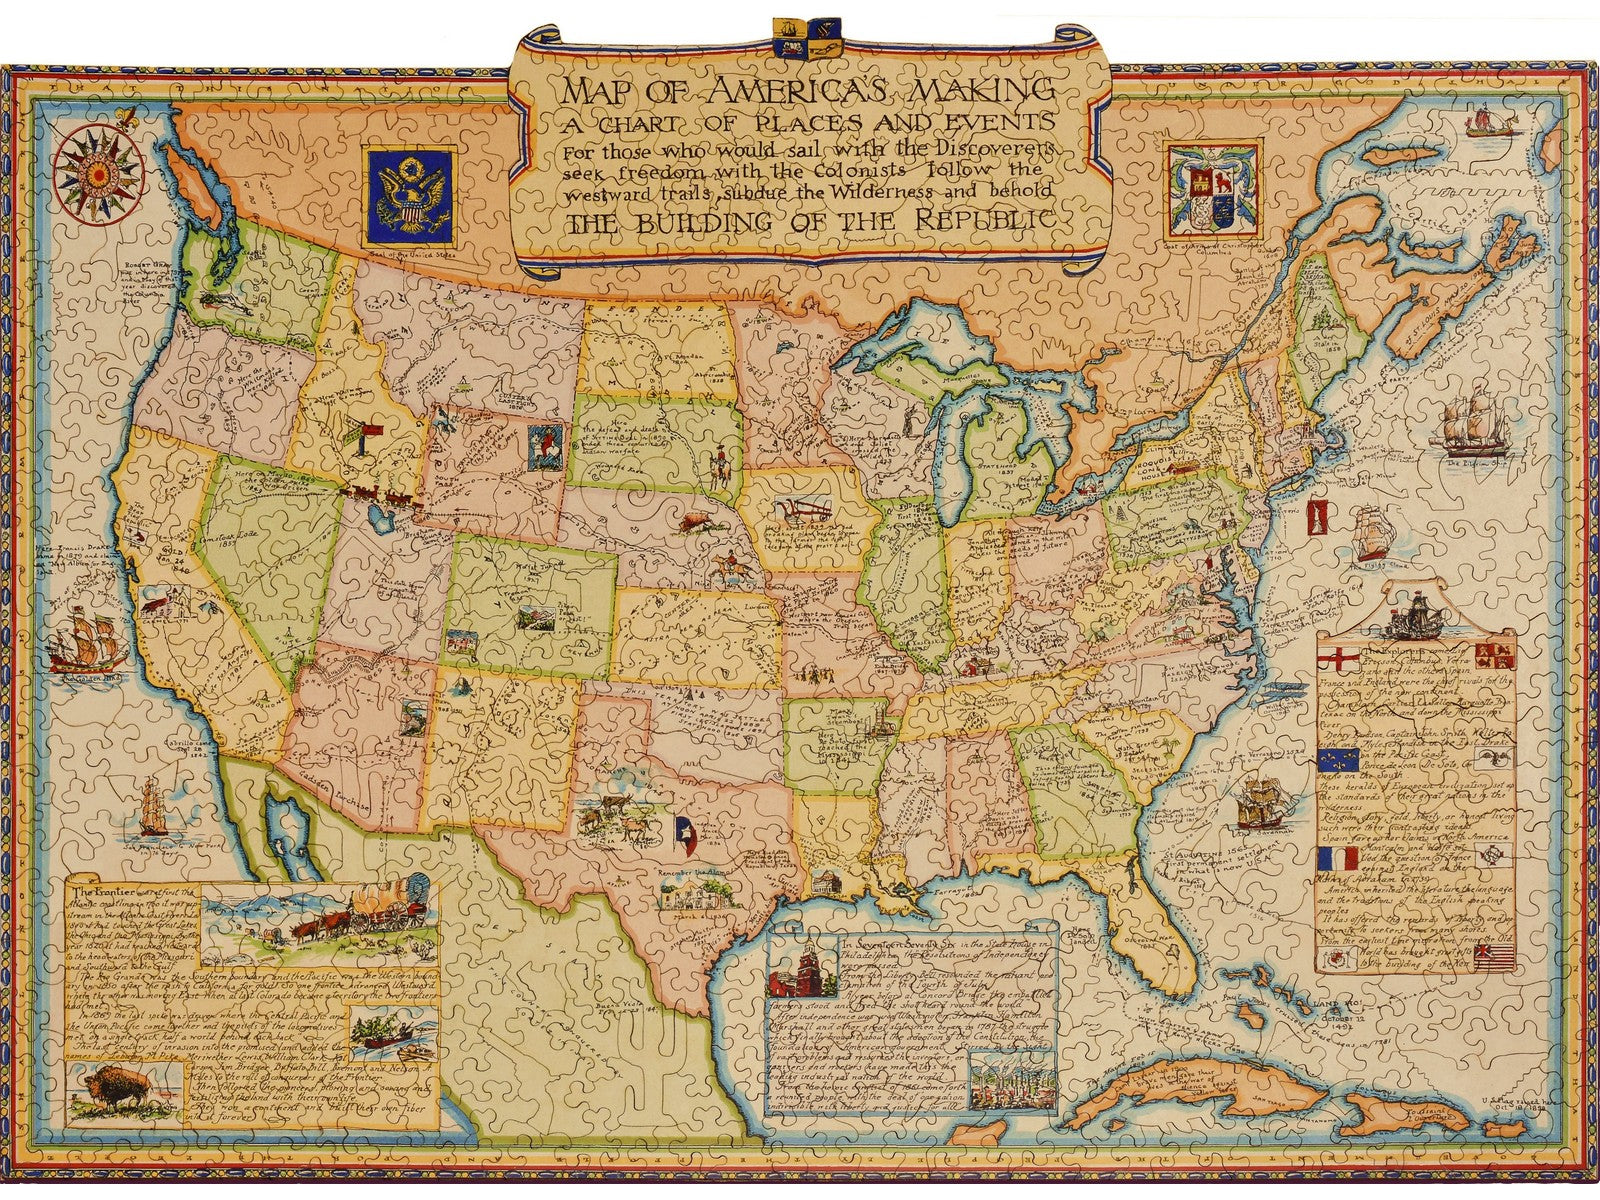 The front of the puzzle, Map of America's Making, which shows an antique map of the united states.